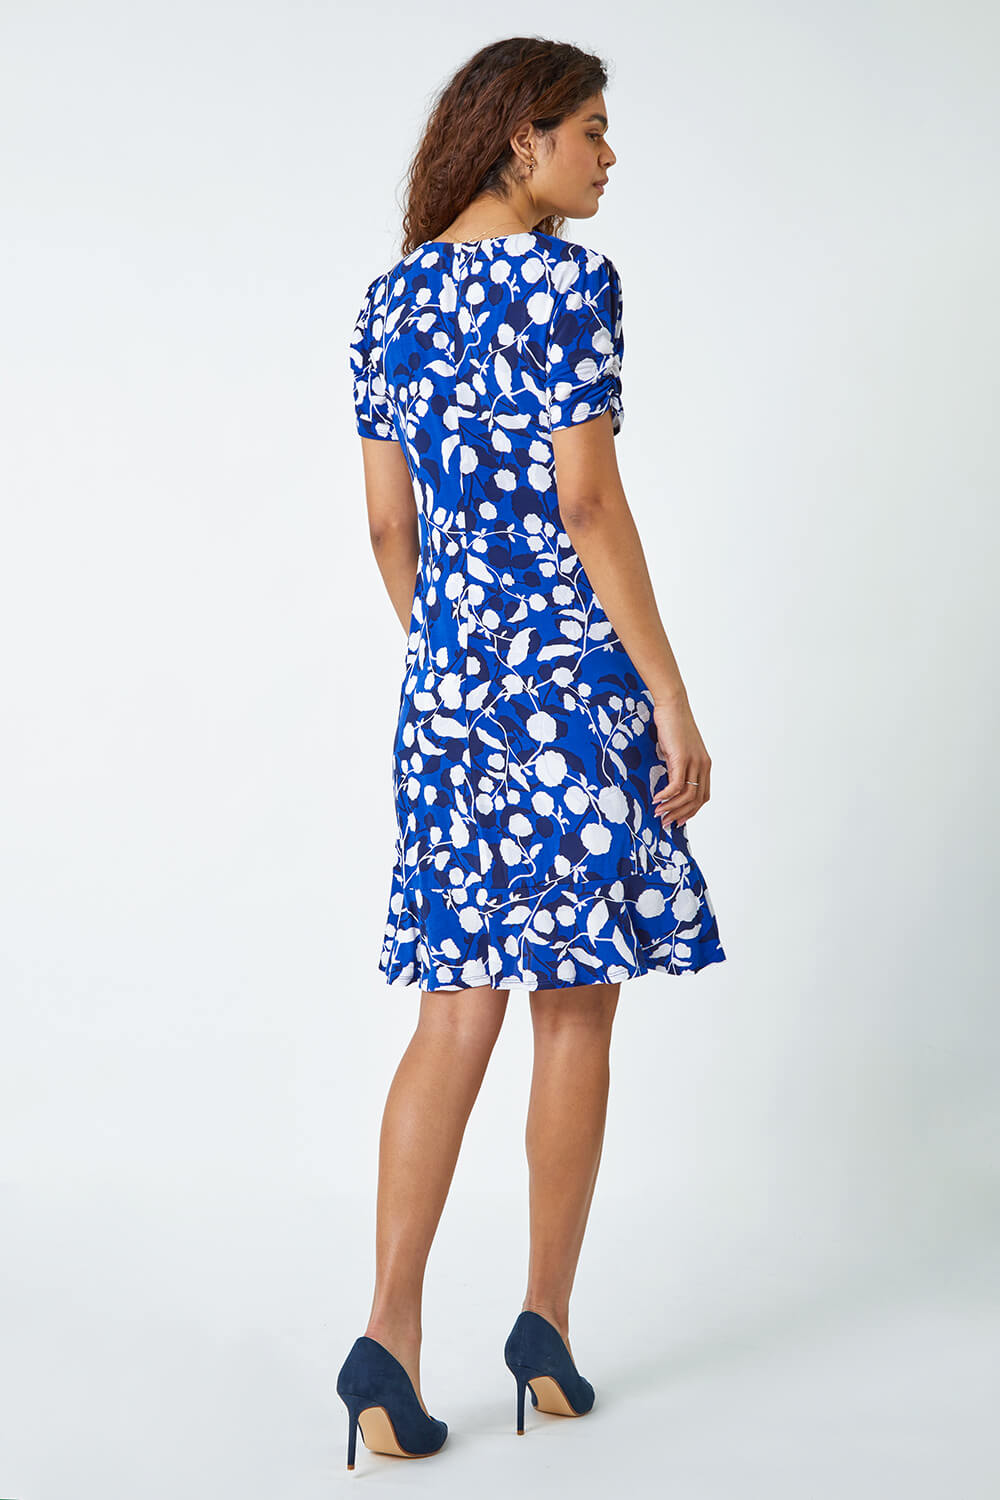 Royal Blue Textured Floral Ruched Stretch Dress, Image 3 of 5